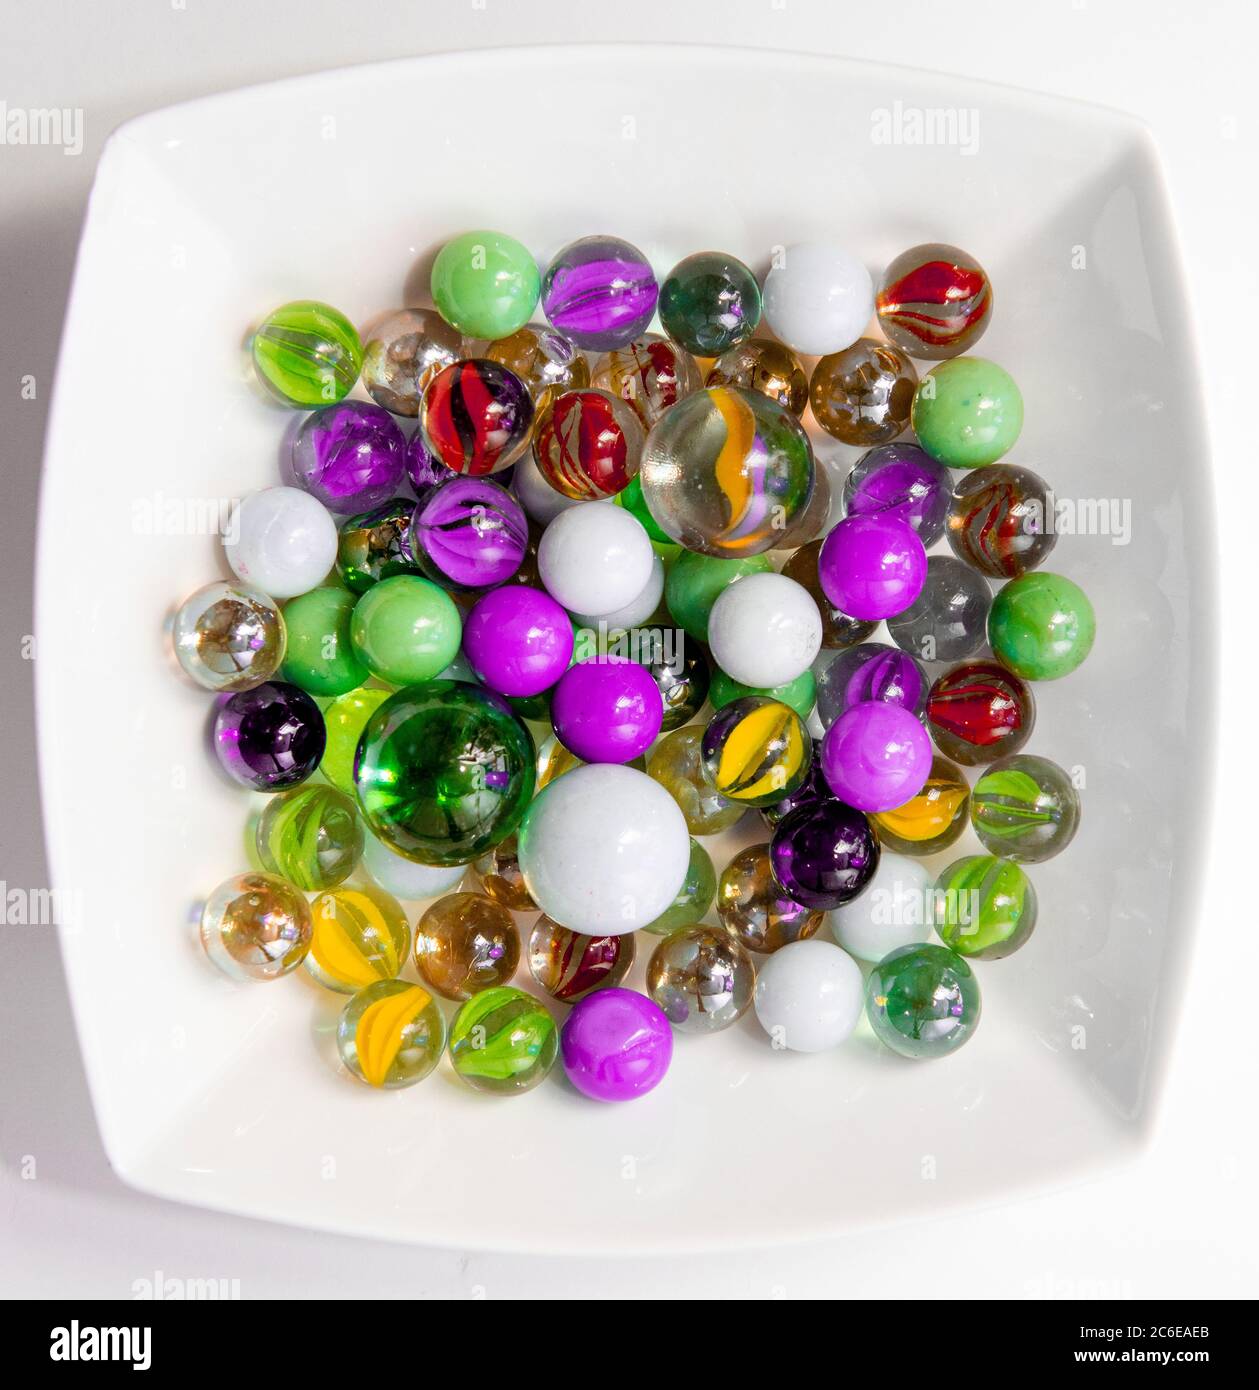 Colourful Marbles in a bowl against a white background Stock Photo